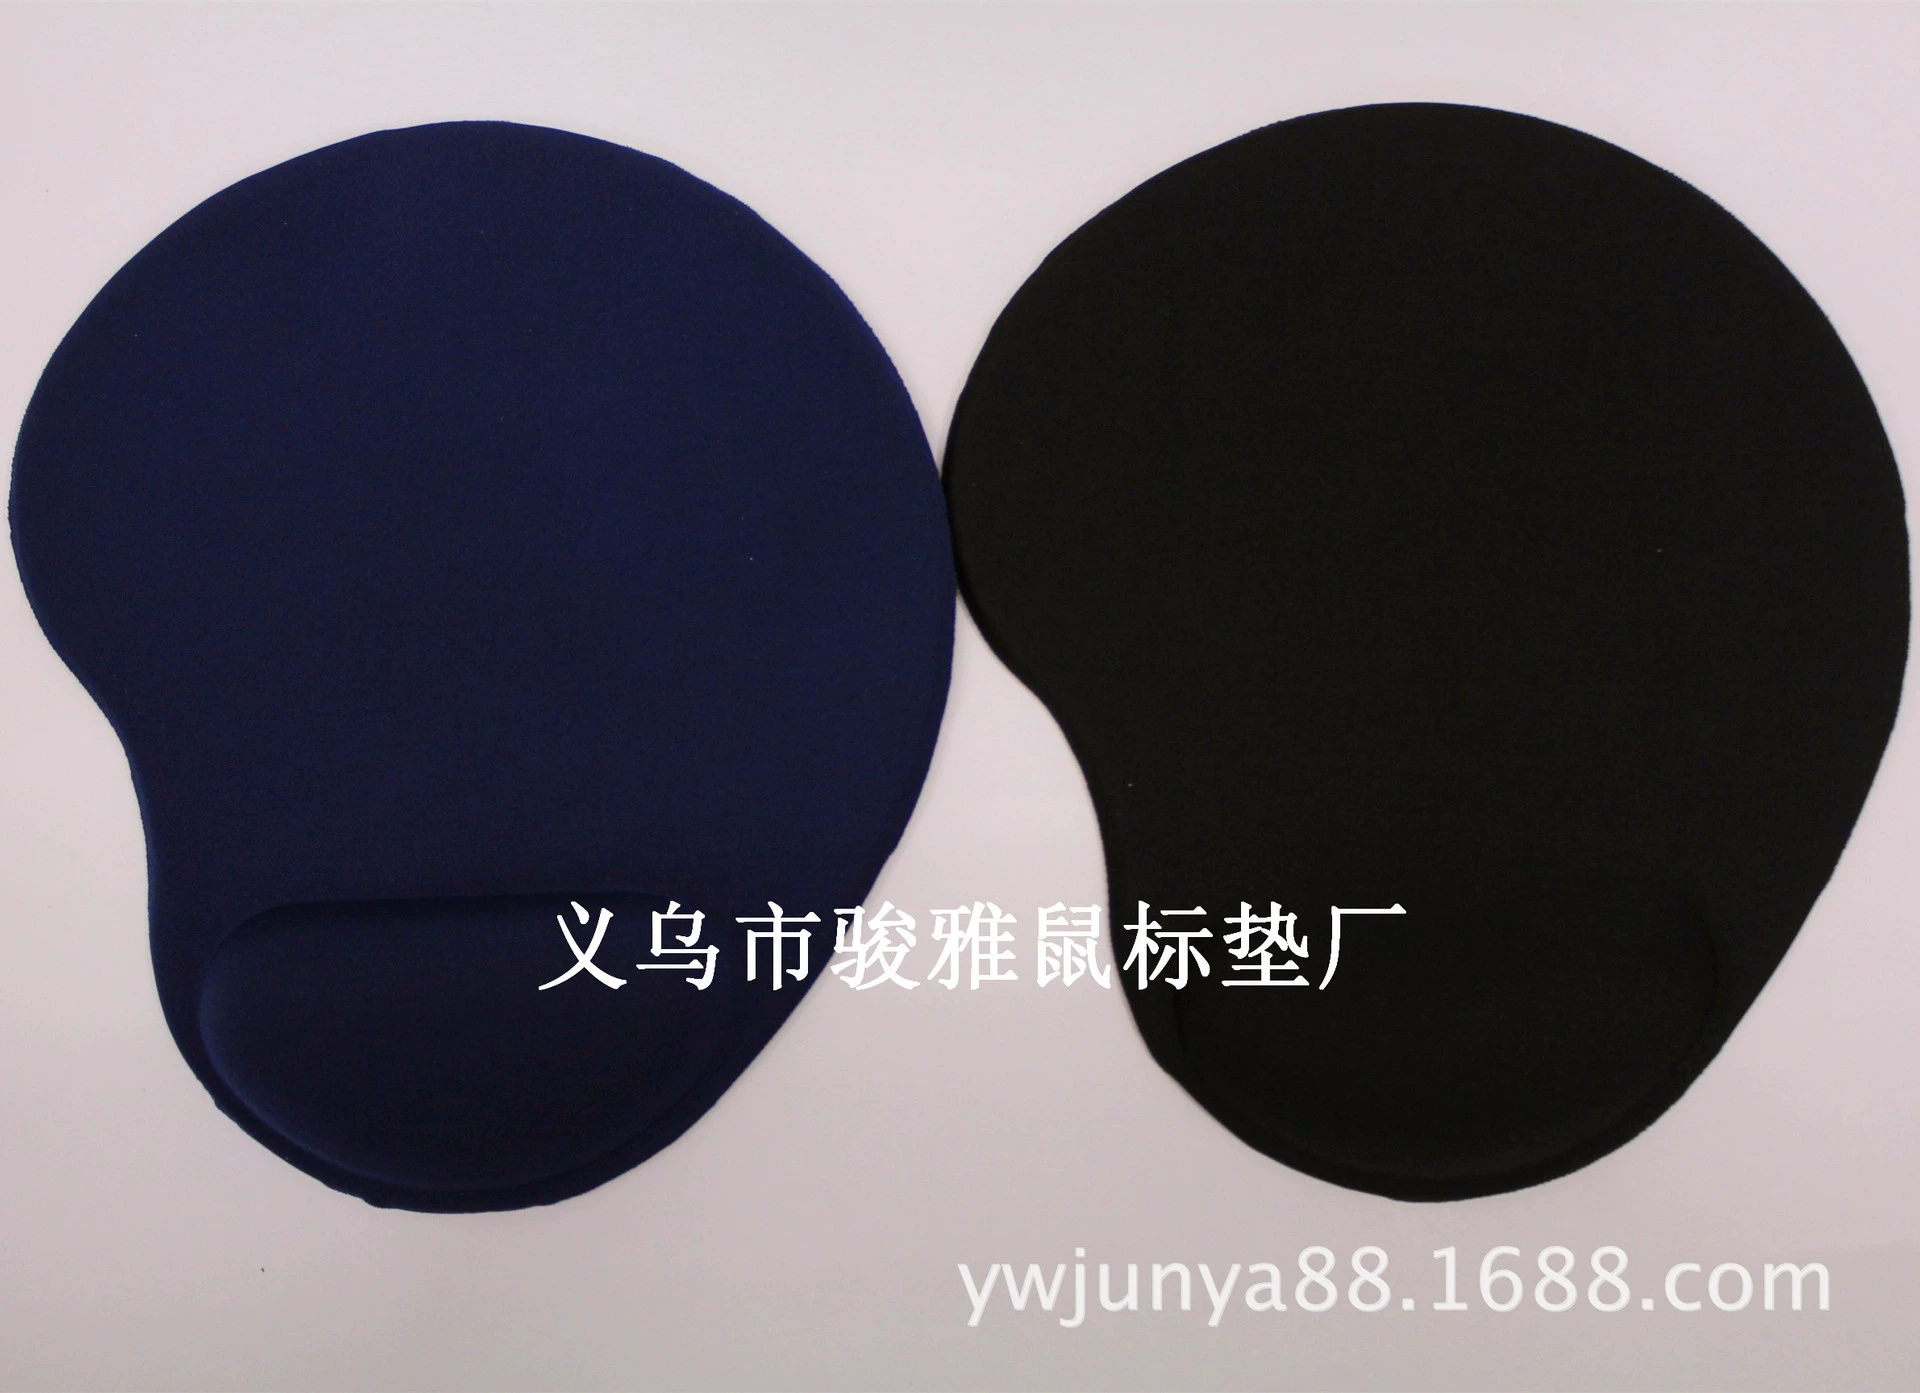 Silica Gel Wrist Mouse pads